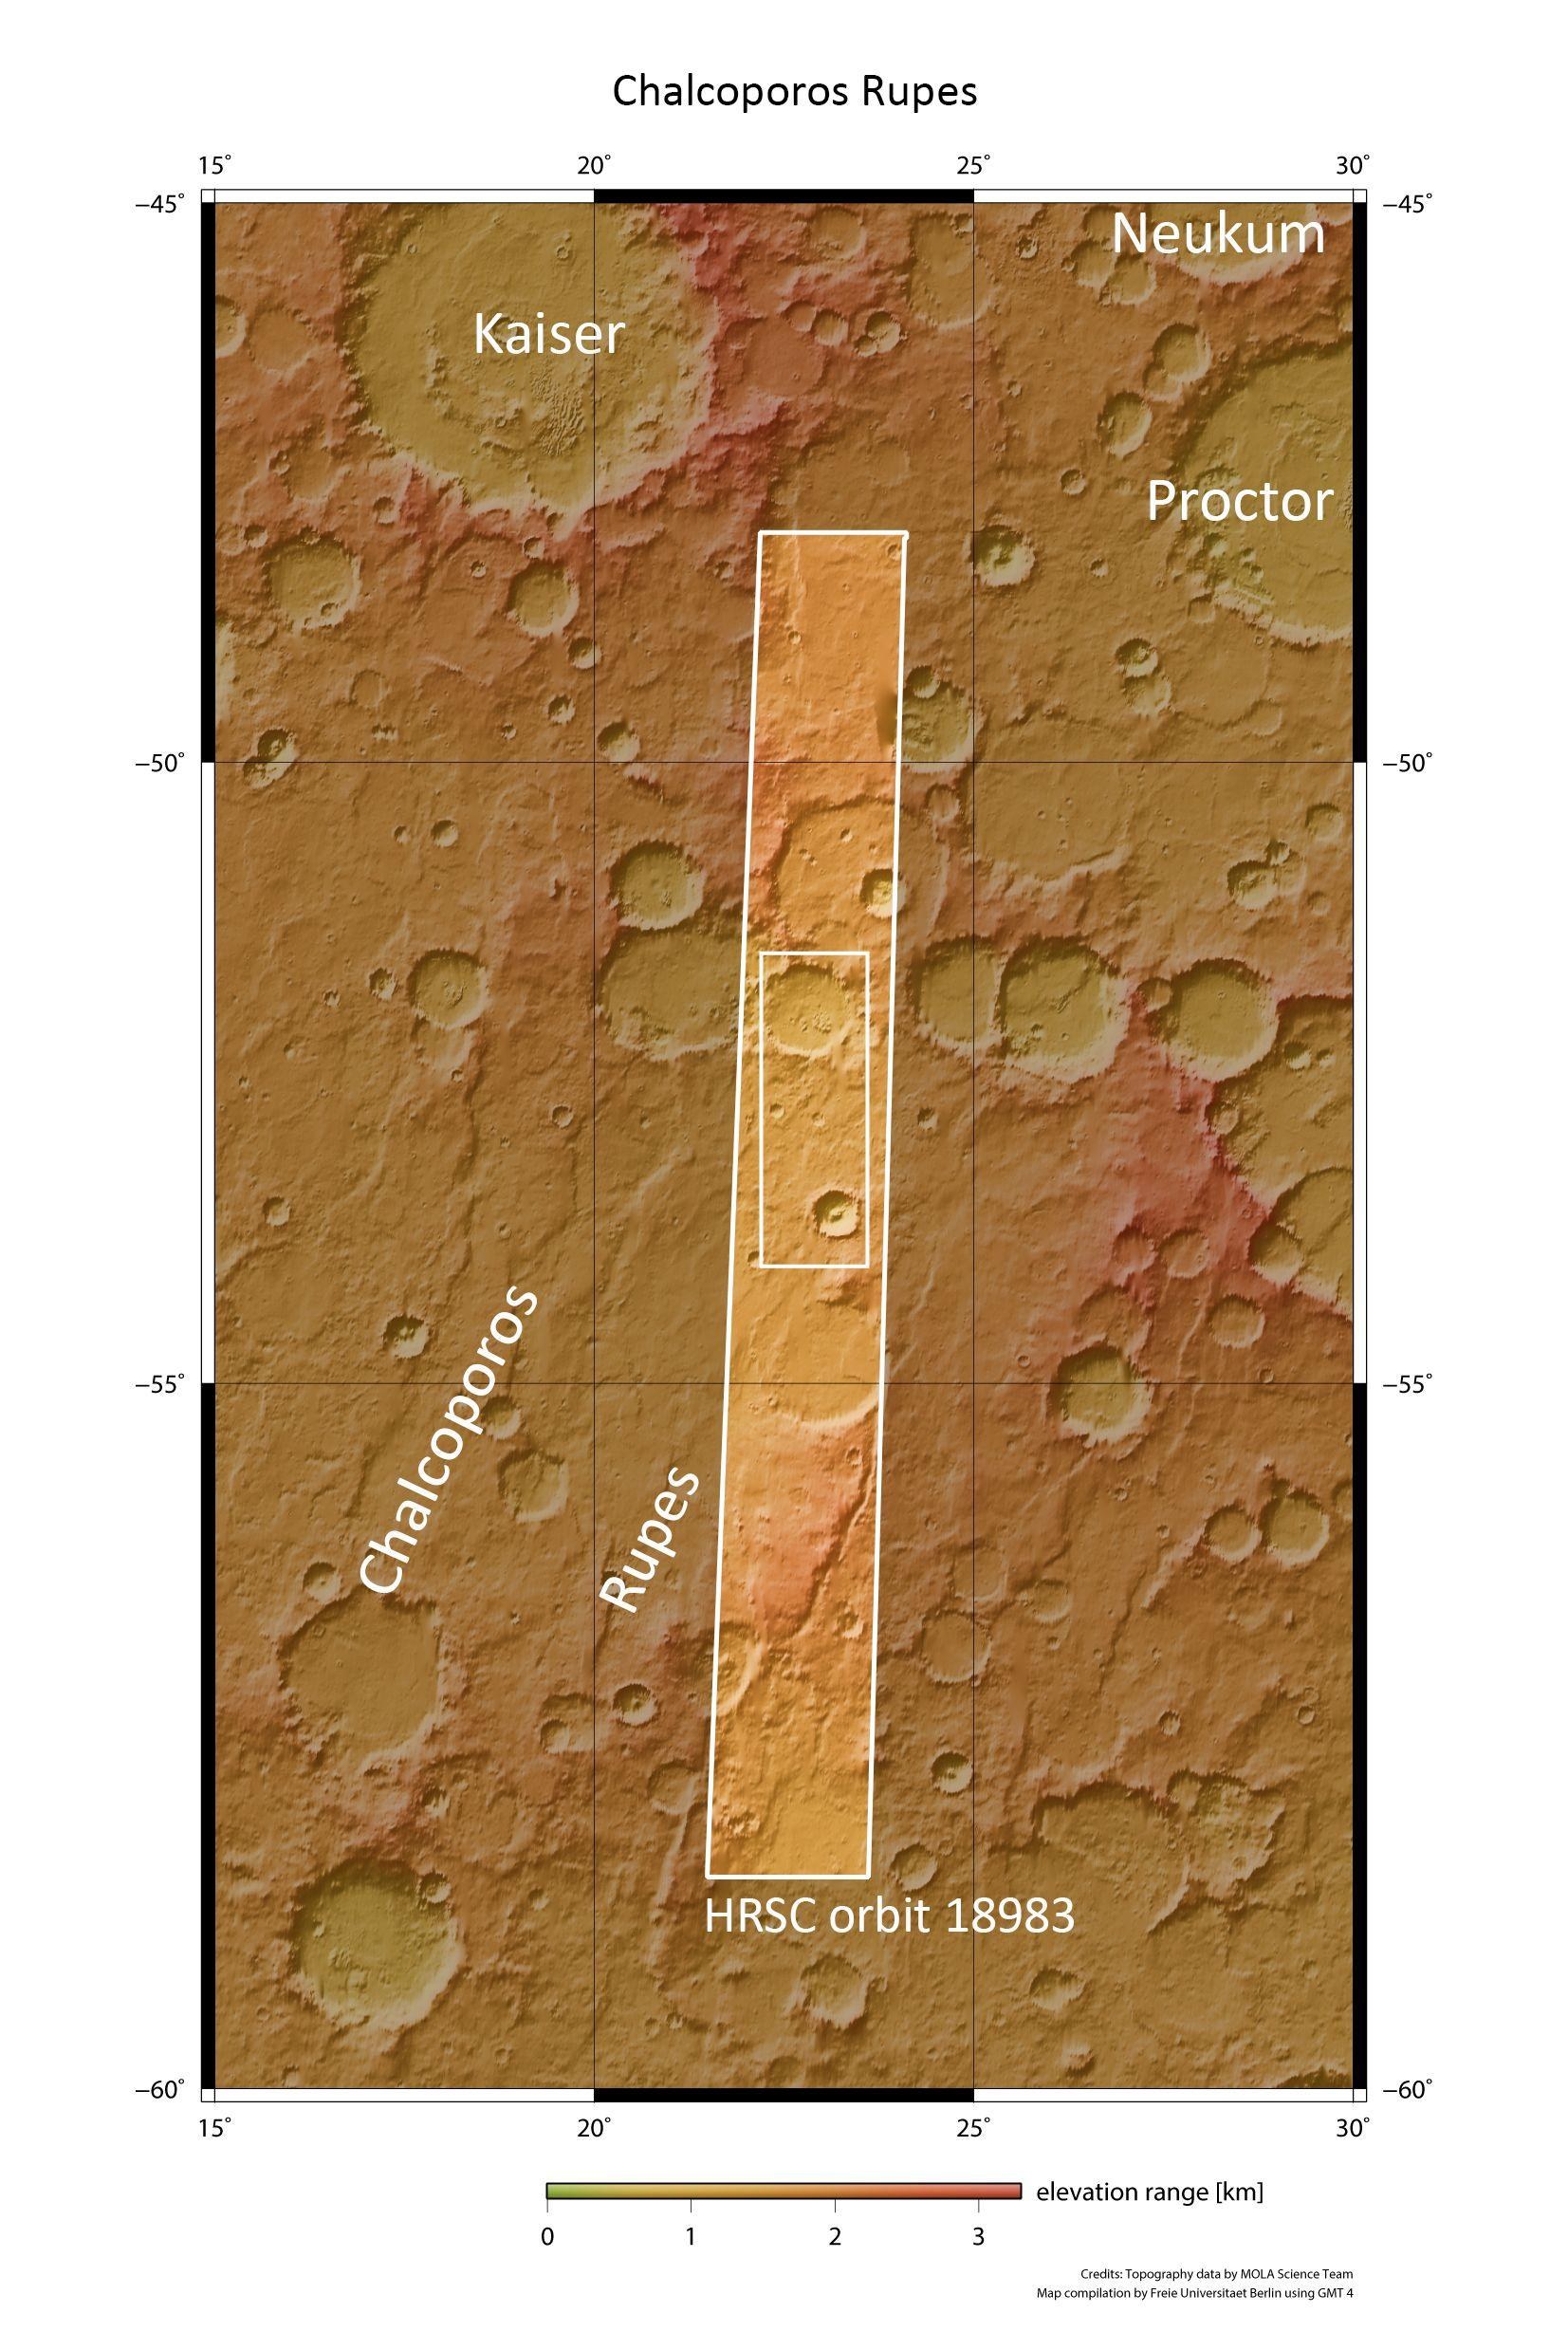 Topographical overview of the Chalcoporos Rupes region